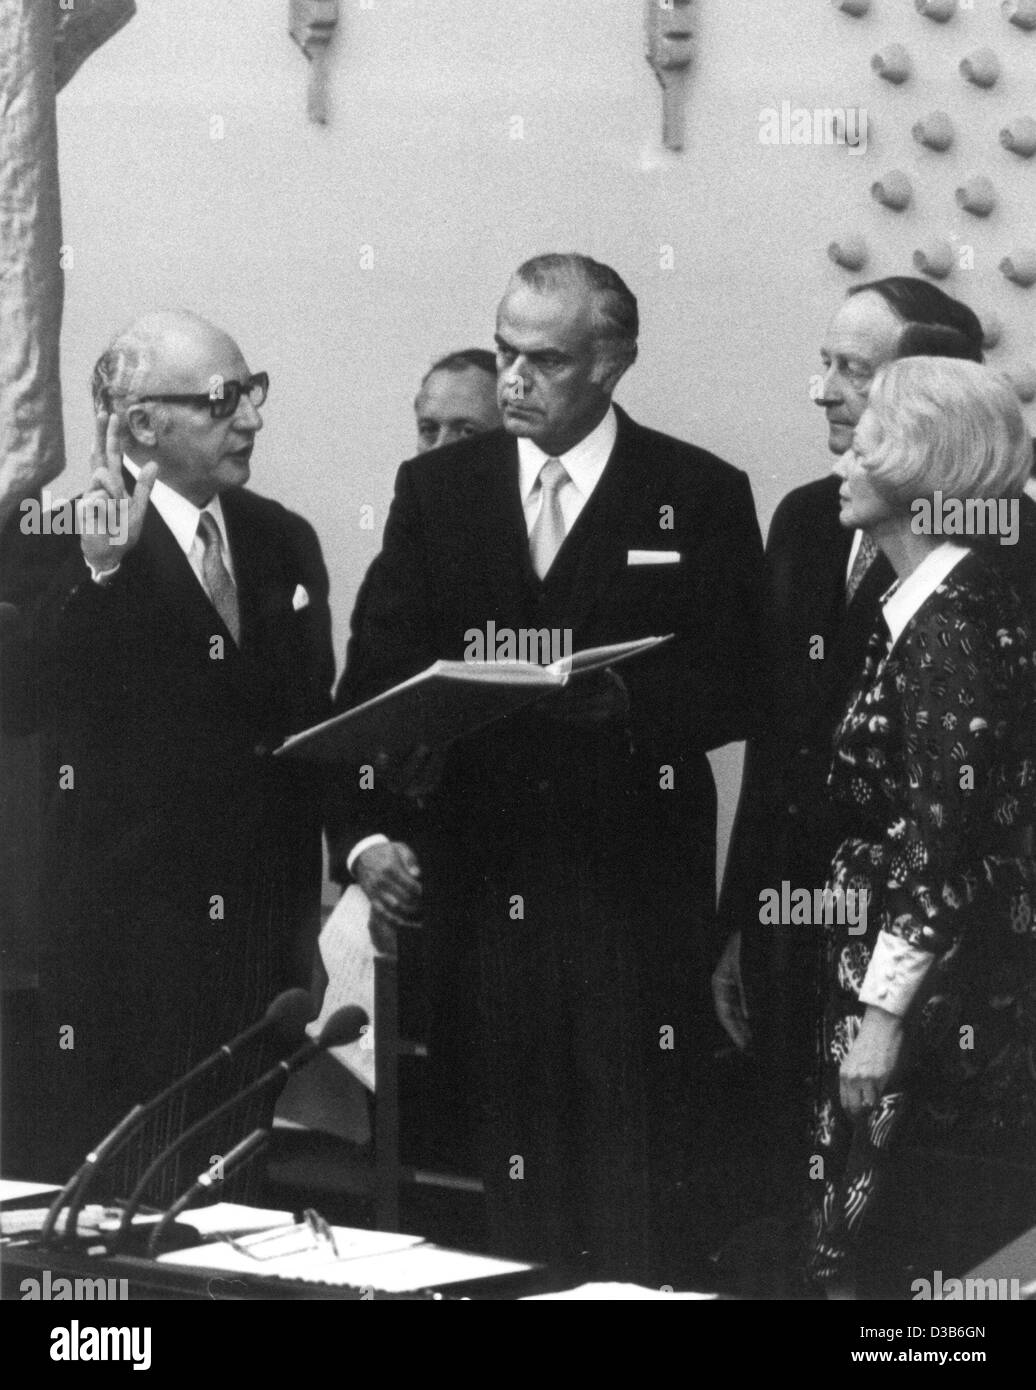 (dpa files) - New German President Walter Scheel (L) is sworn in by Bundestag Director Helmut Schellknecht (C) in the German parliament in Bonn, West Germany, 1 July 1974. On the right the Prime Minister of the state of Baden-Wuerttemberg, Hans Filbinger, and Bundestag President Annemarie Renger. Wa Stock Photo